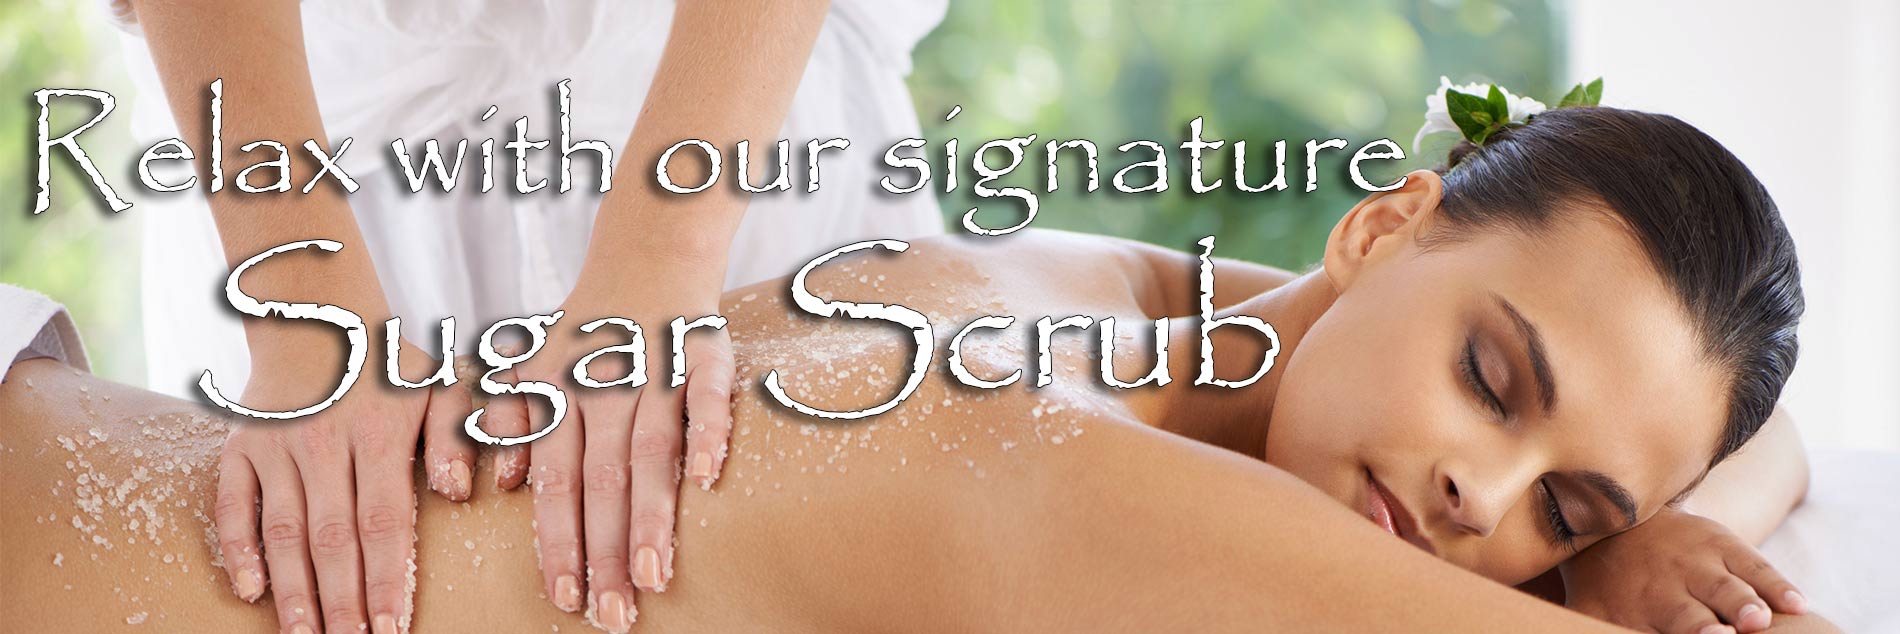 Relax with our signature Sugar Scrub